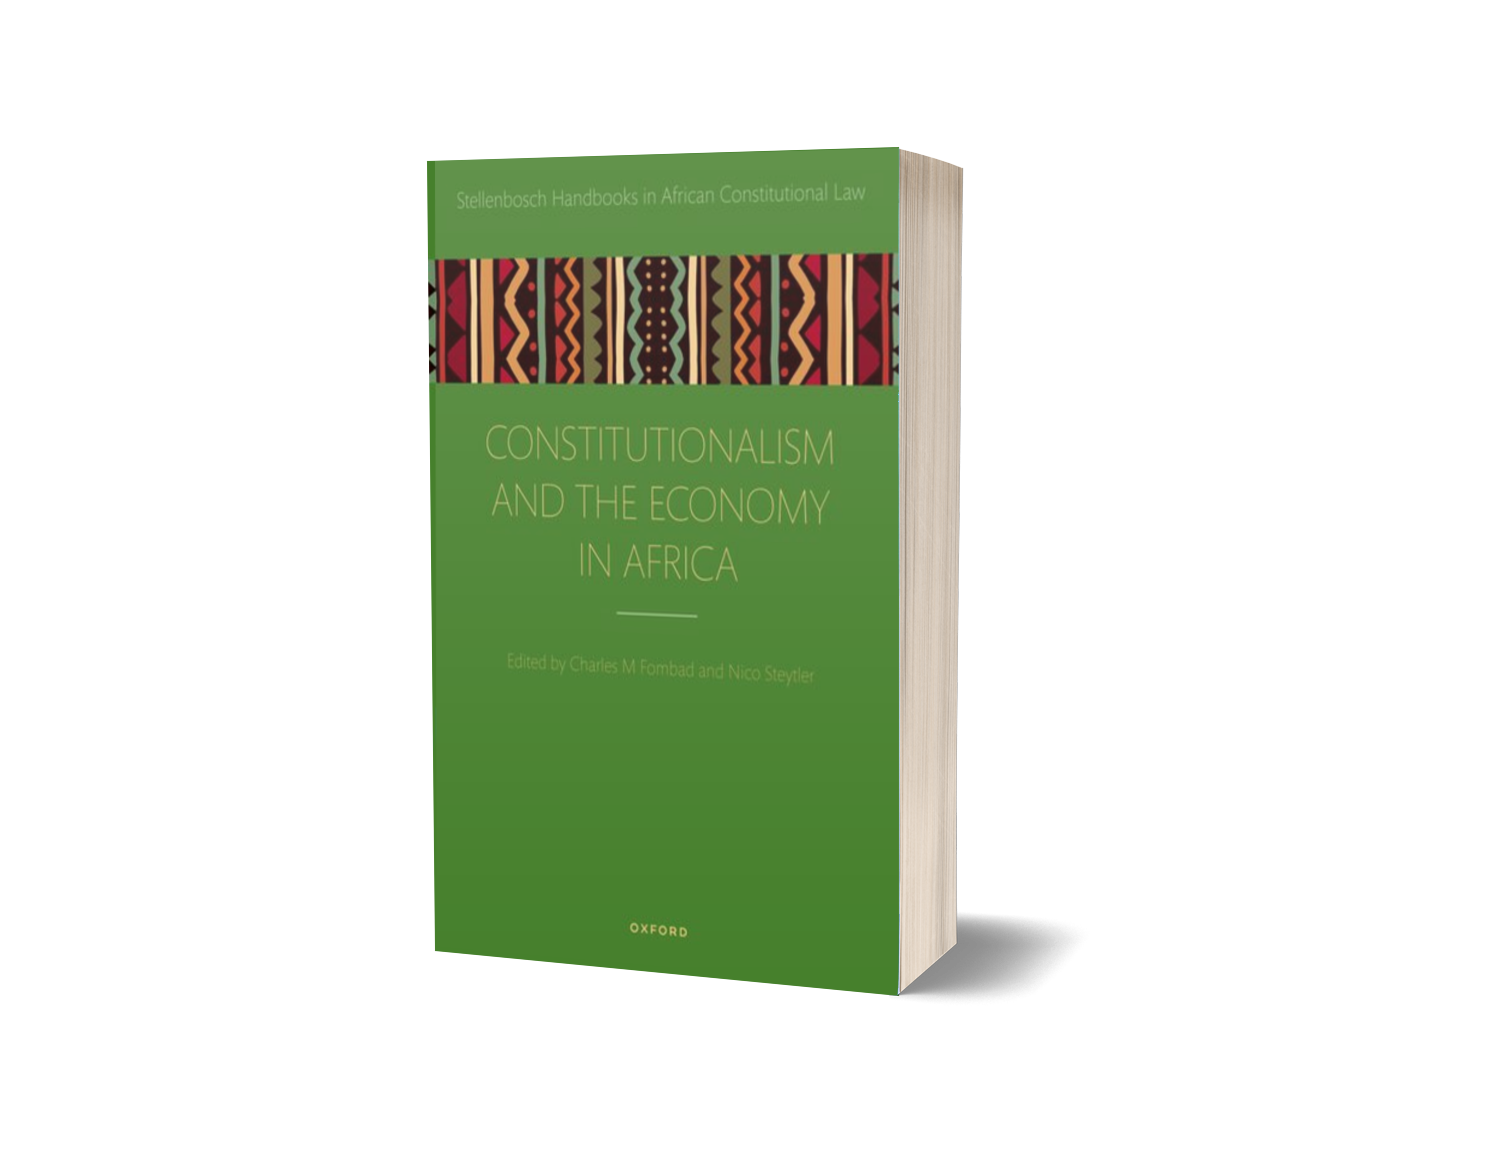 Steytler, Nico (with Charles Fombad) (eds.) Constitutionalism and the Economy in Africa (2022) Oxford University Press, 464pp.